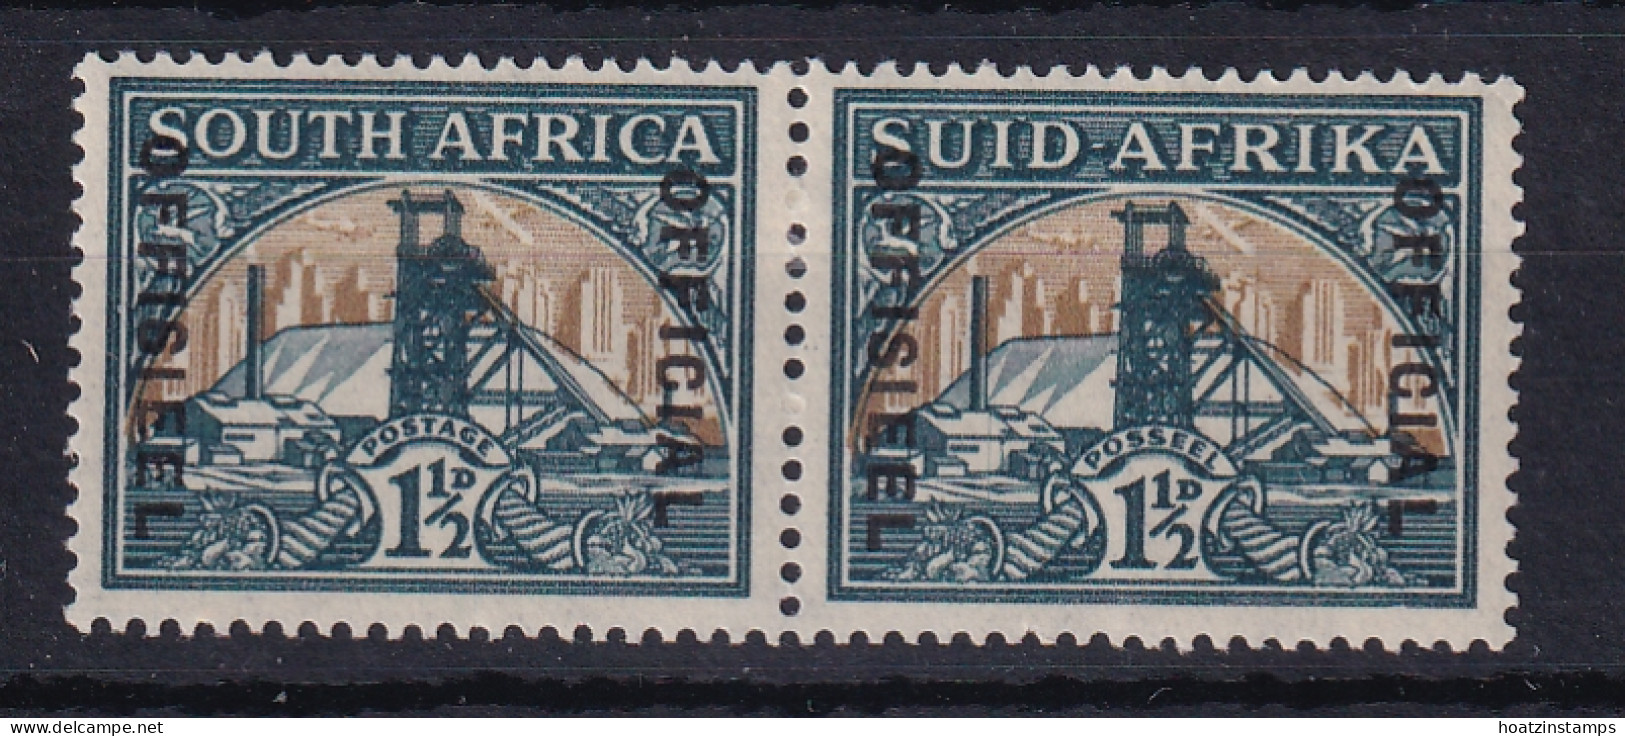 South Africa: 1935/49   Official - Goldmine   SG O22aw    1½d   Green & Bright Gold  [Wmk Upright]  MH Pair - Dienstmarken